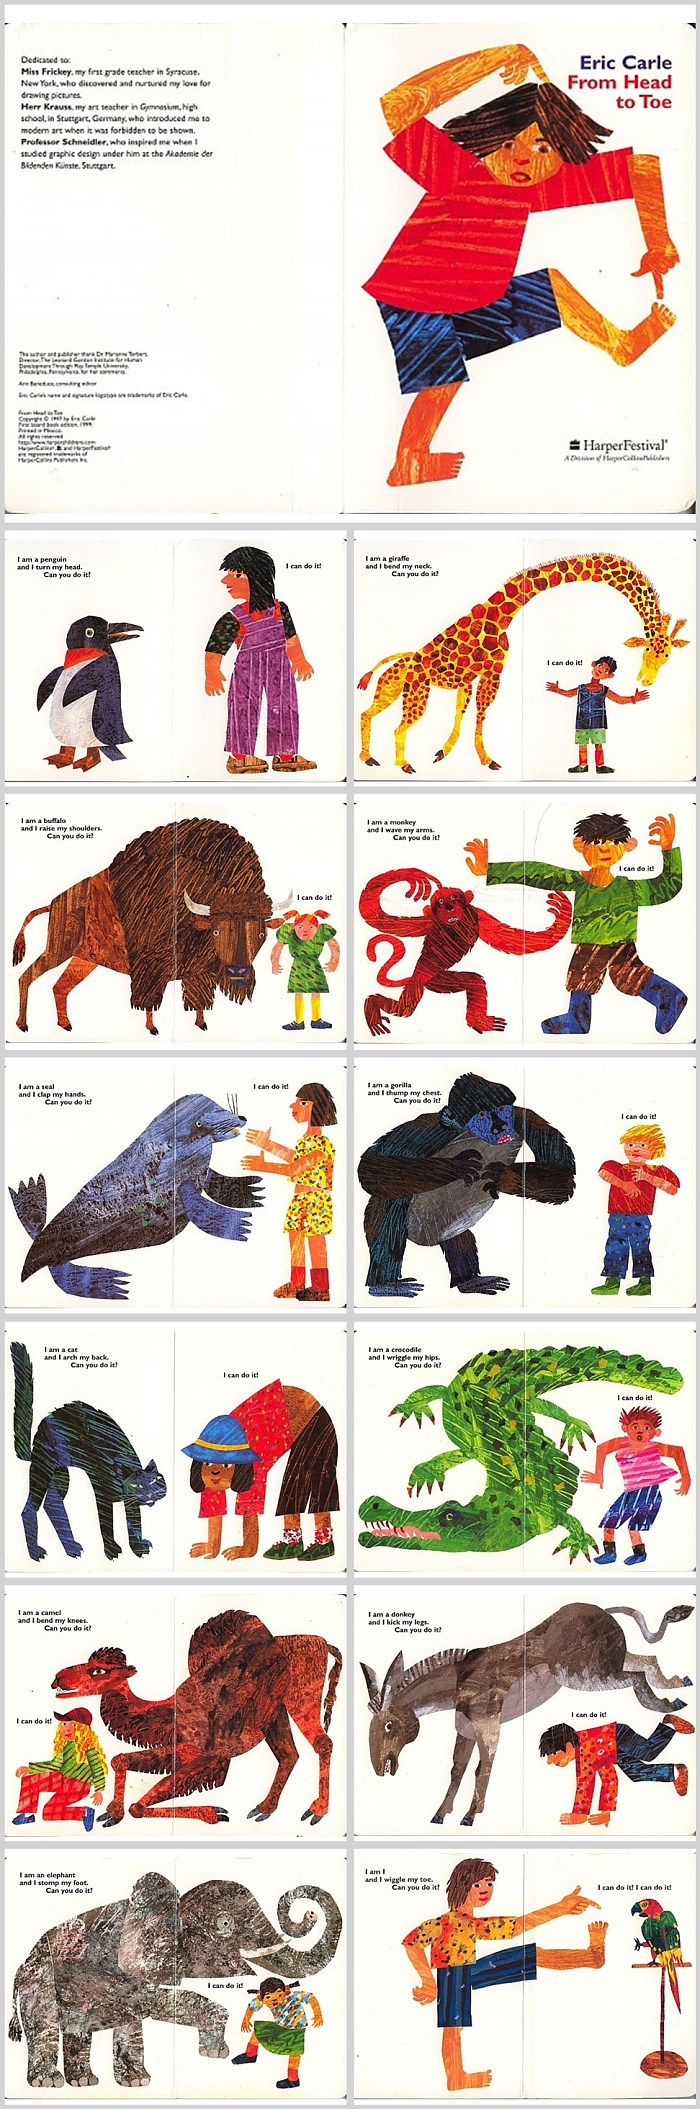 Eric carle from held to toe英文绘本故事PPT